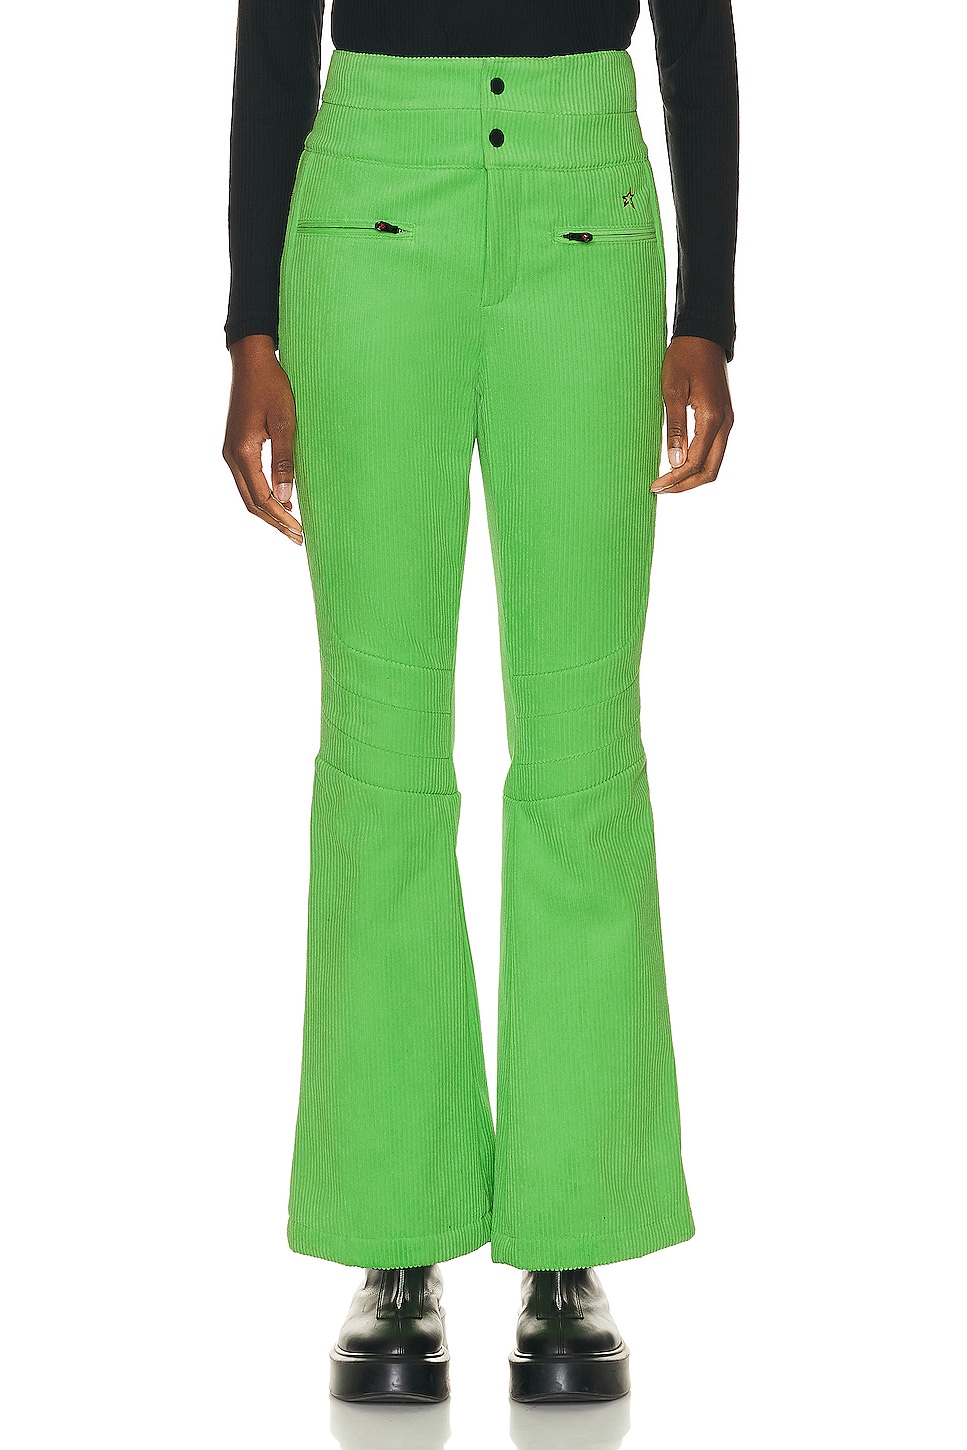 Aurora Flare Pant in Green